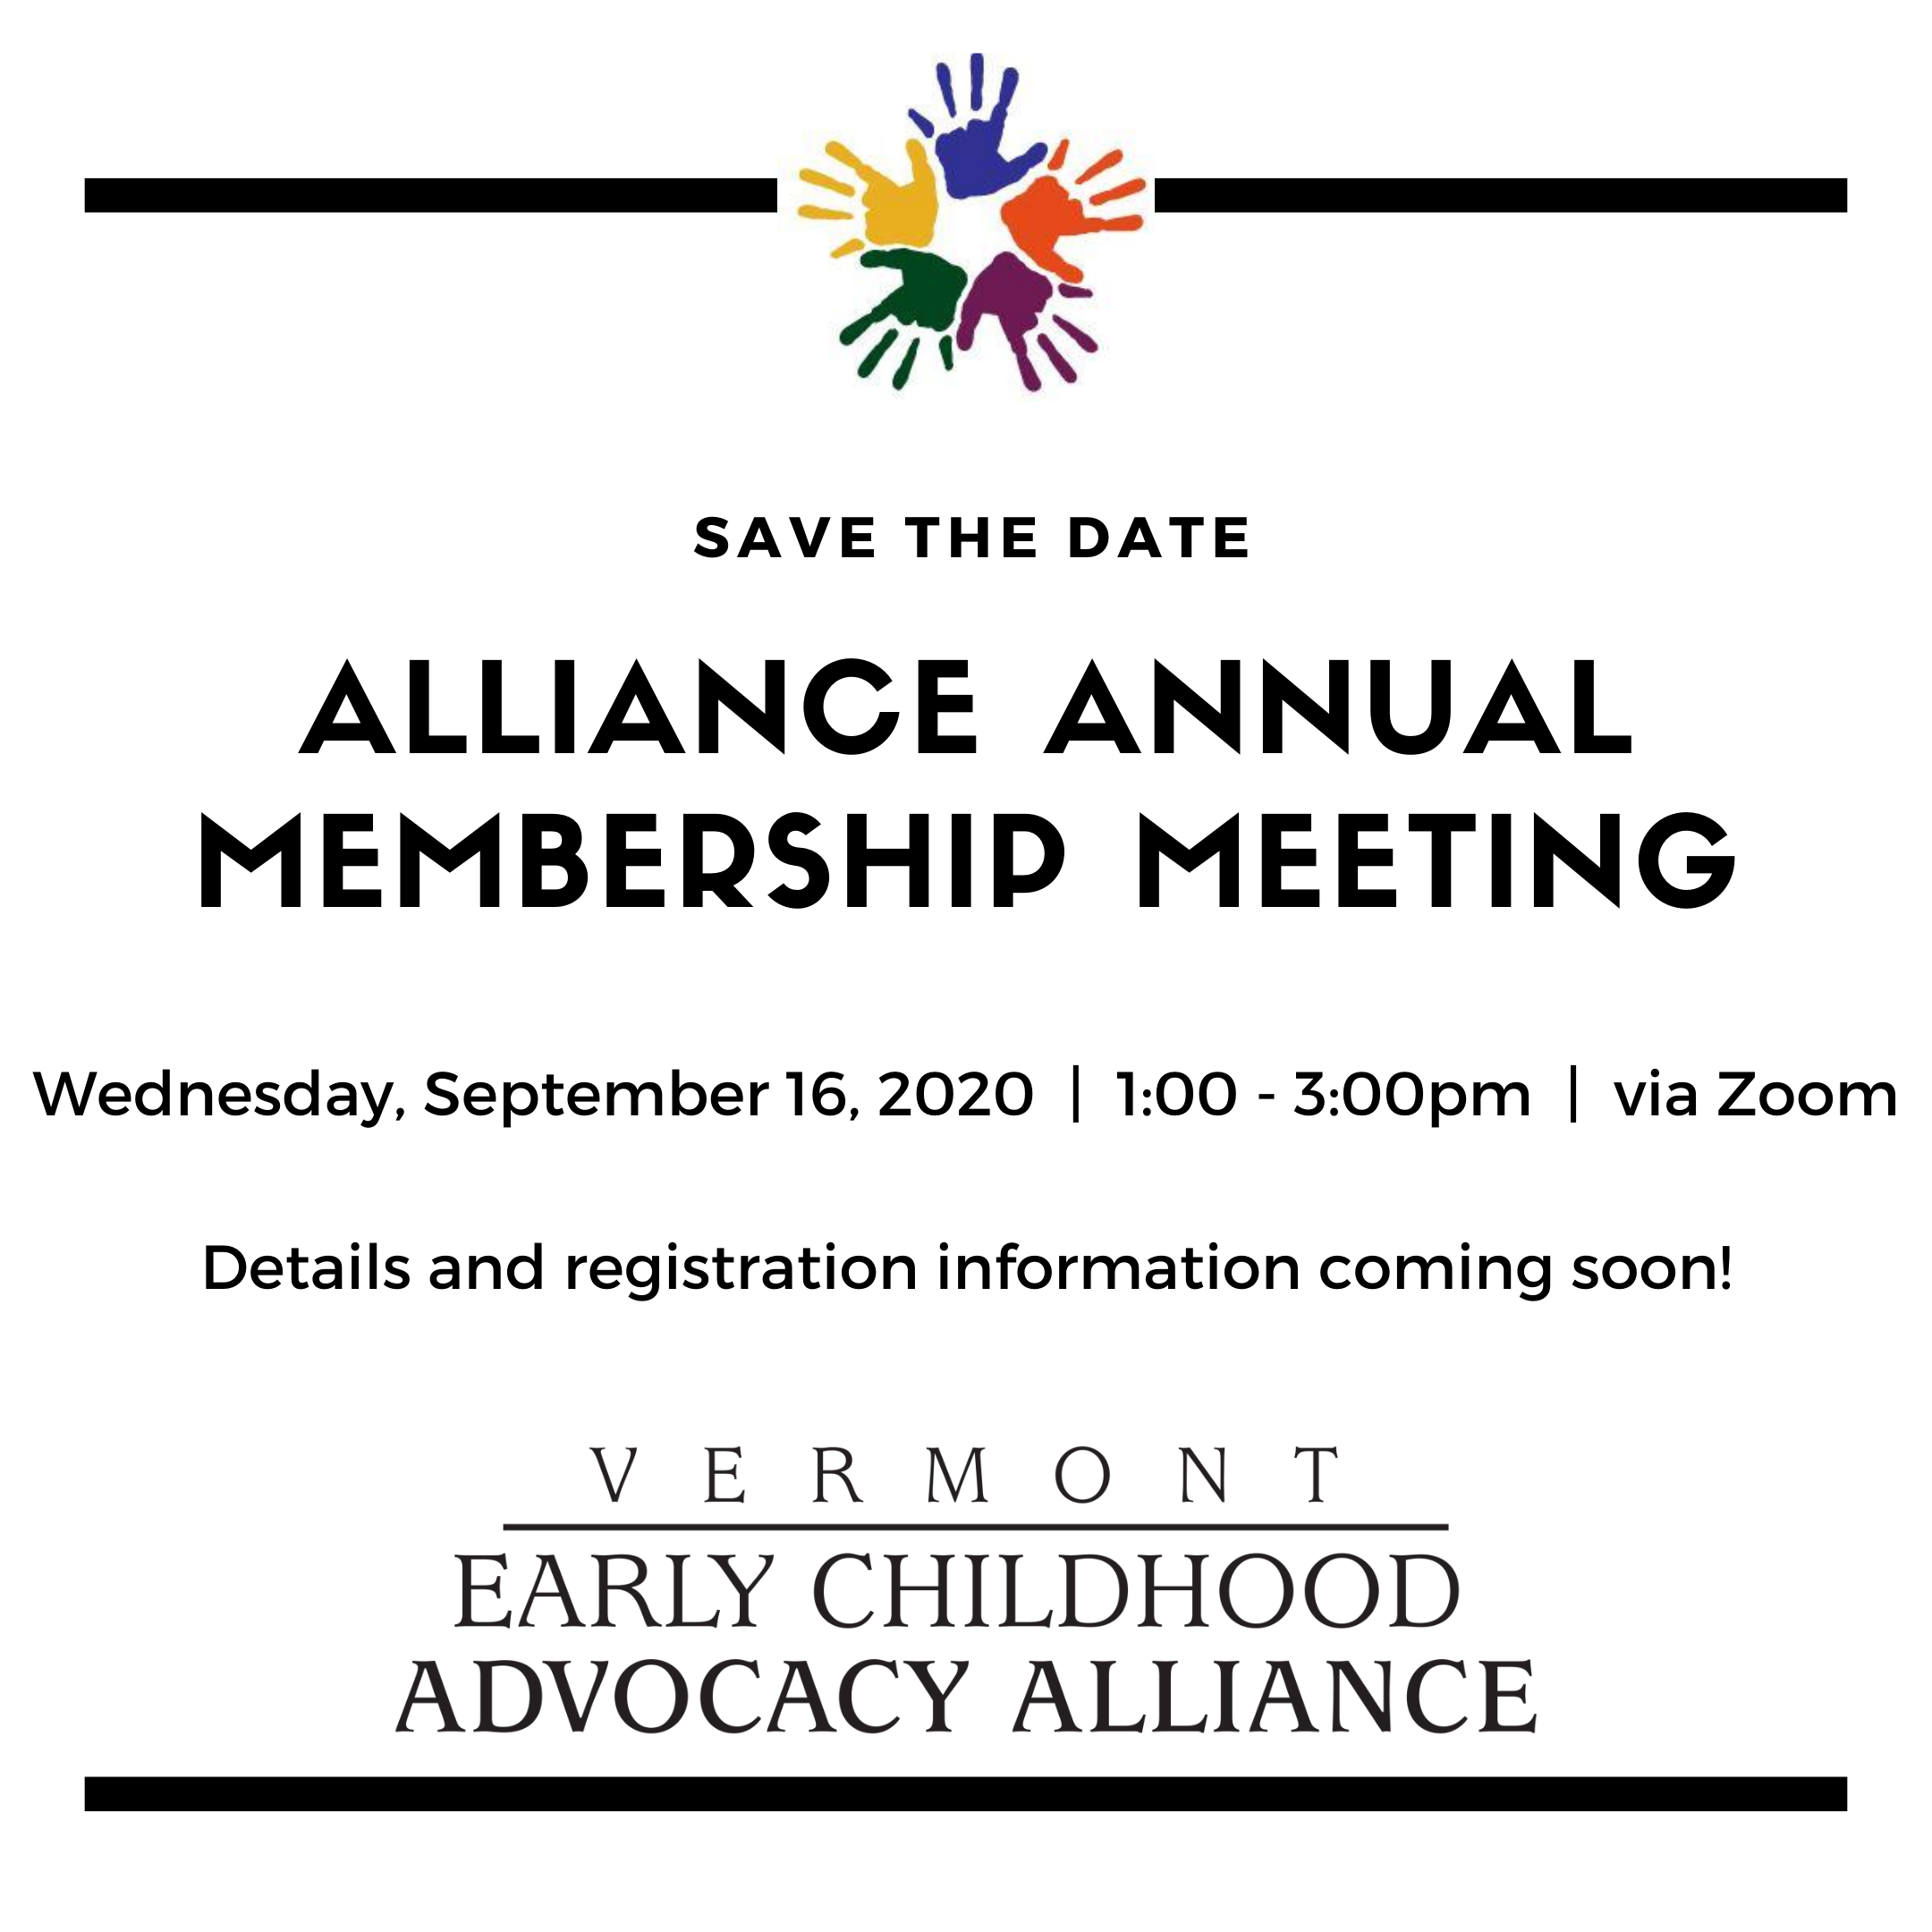 Alliance Annual Meeting Save the Date. Wednesday, September 16, 1-3pm, via Zoom. Details and registration information coming soon!